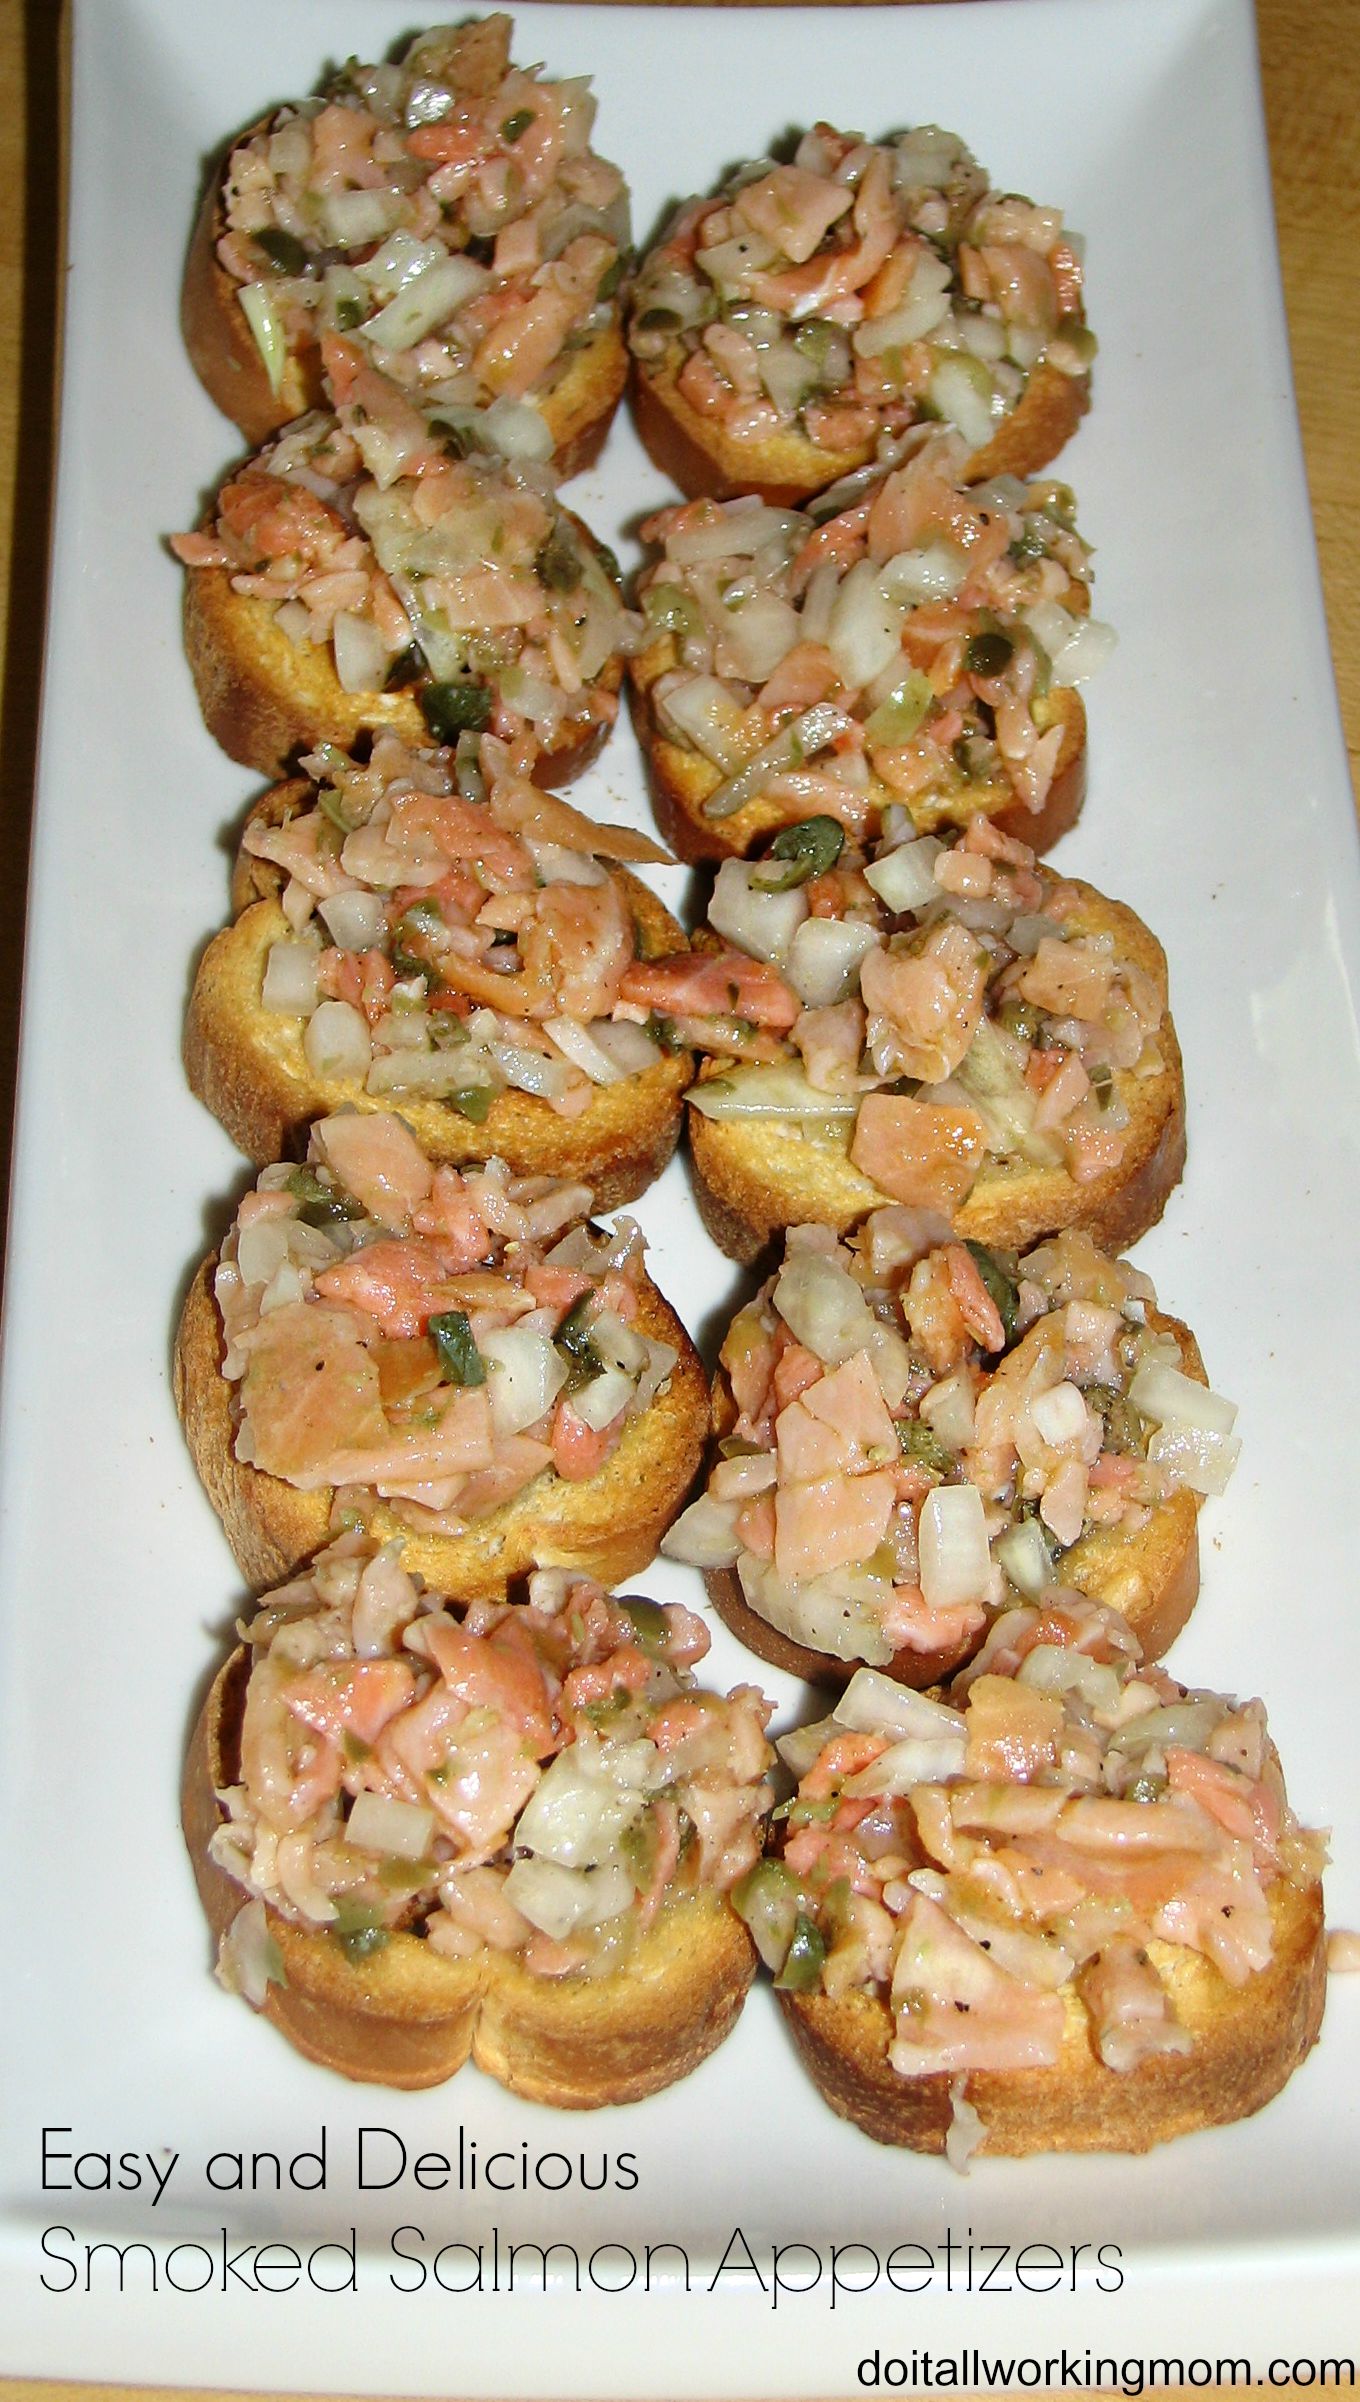 Easy and Delicious Smoked Salmon Appetizers